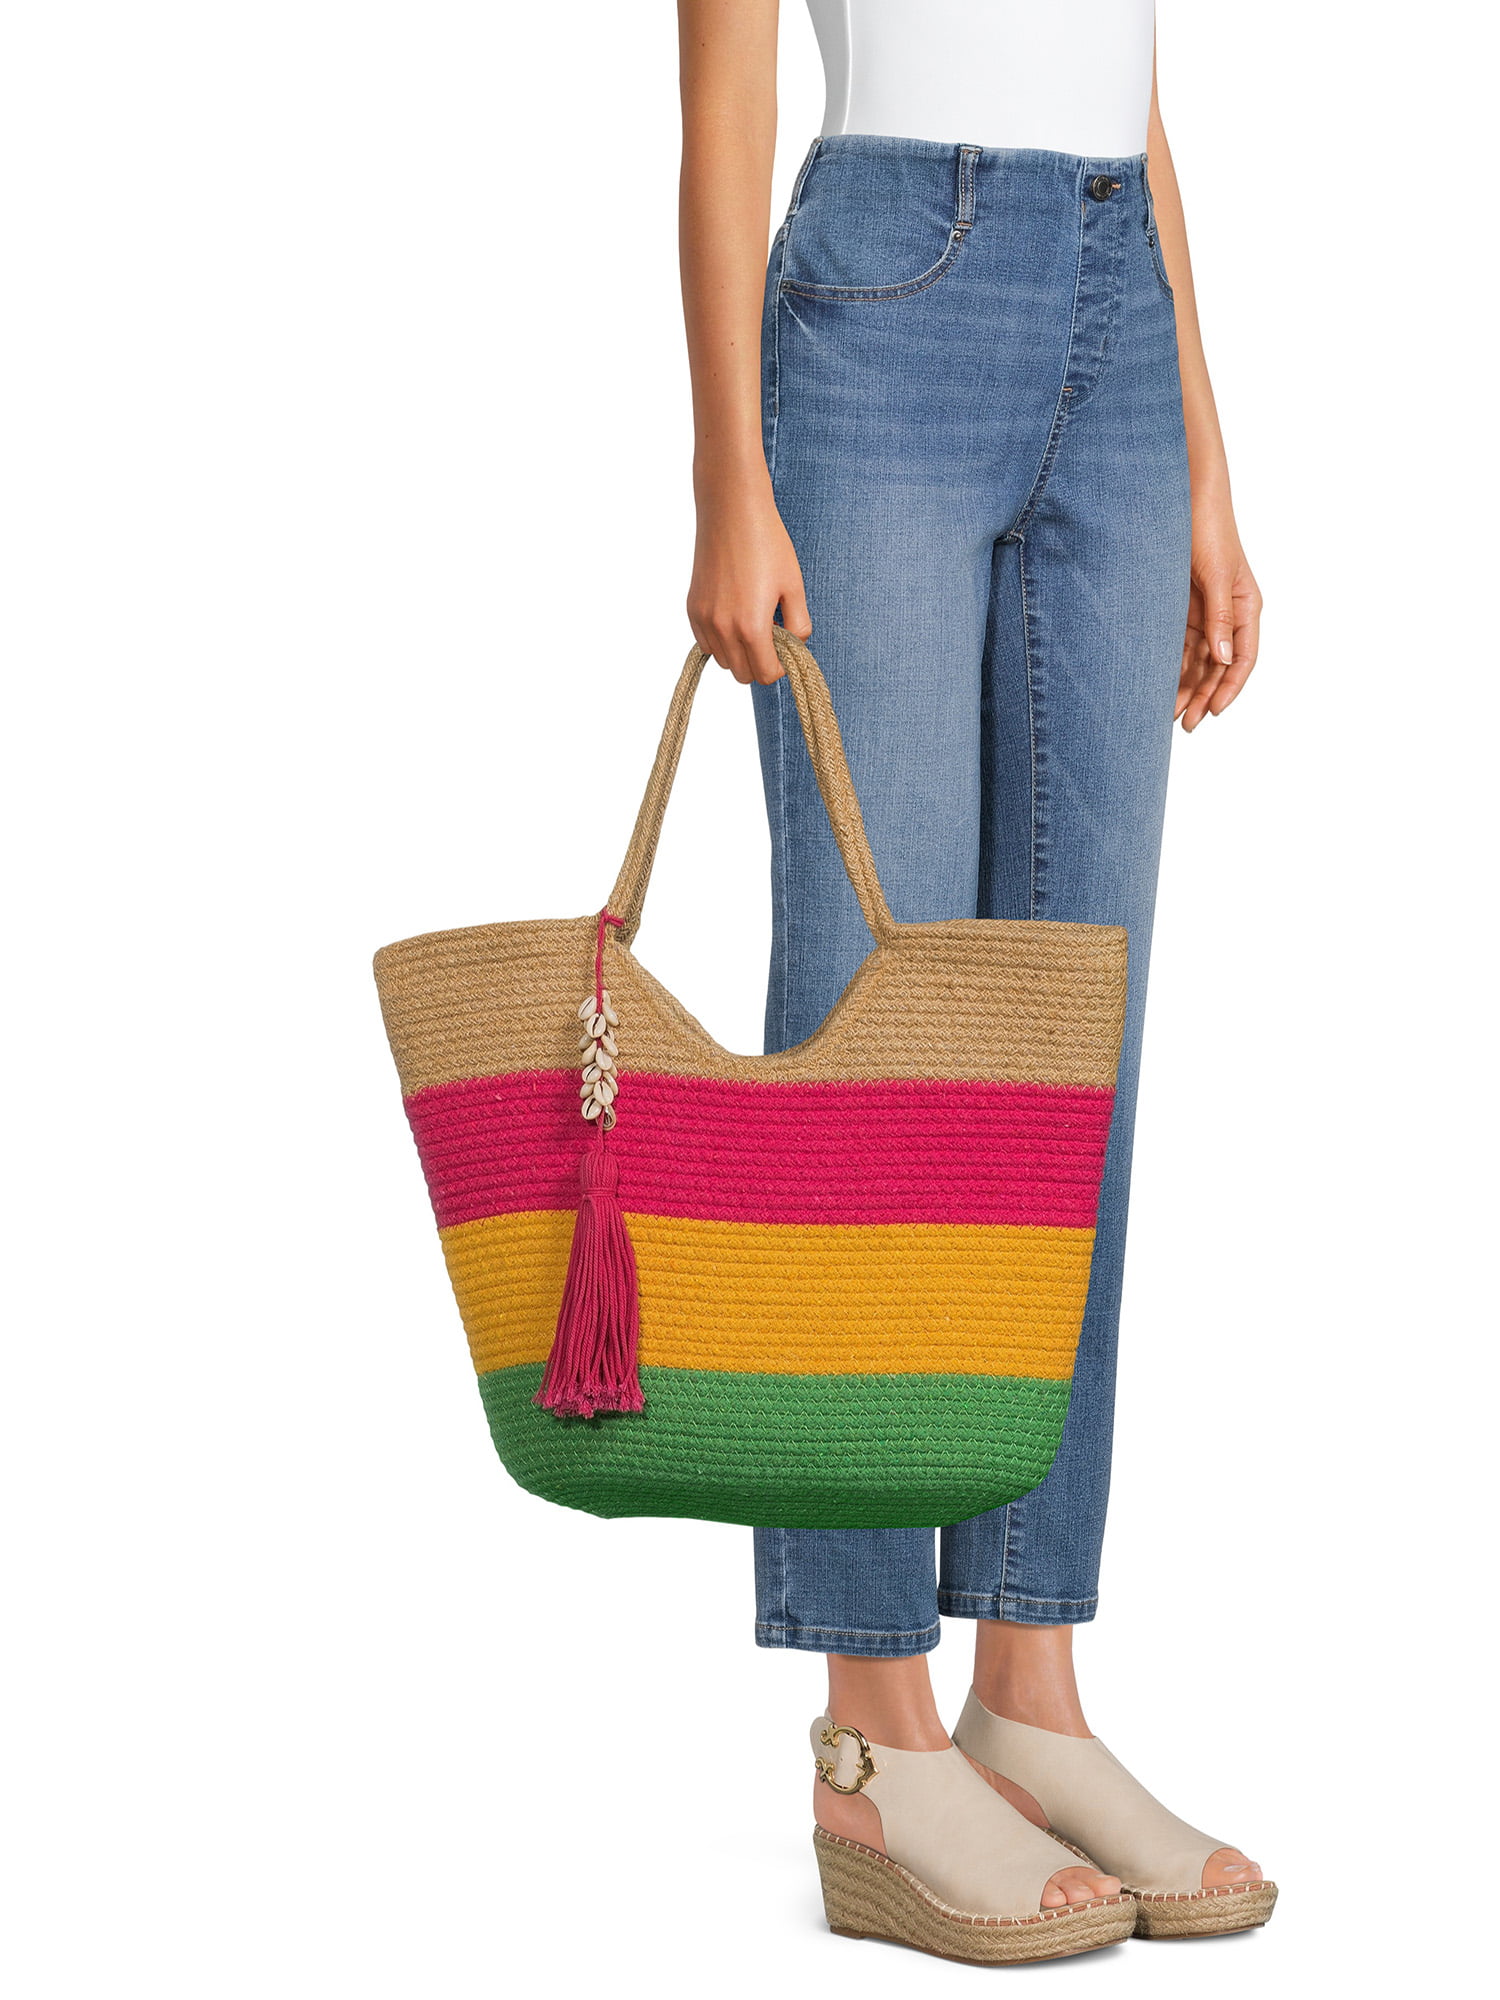 Tucson Flora Tote Bag – Brushes and Boots